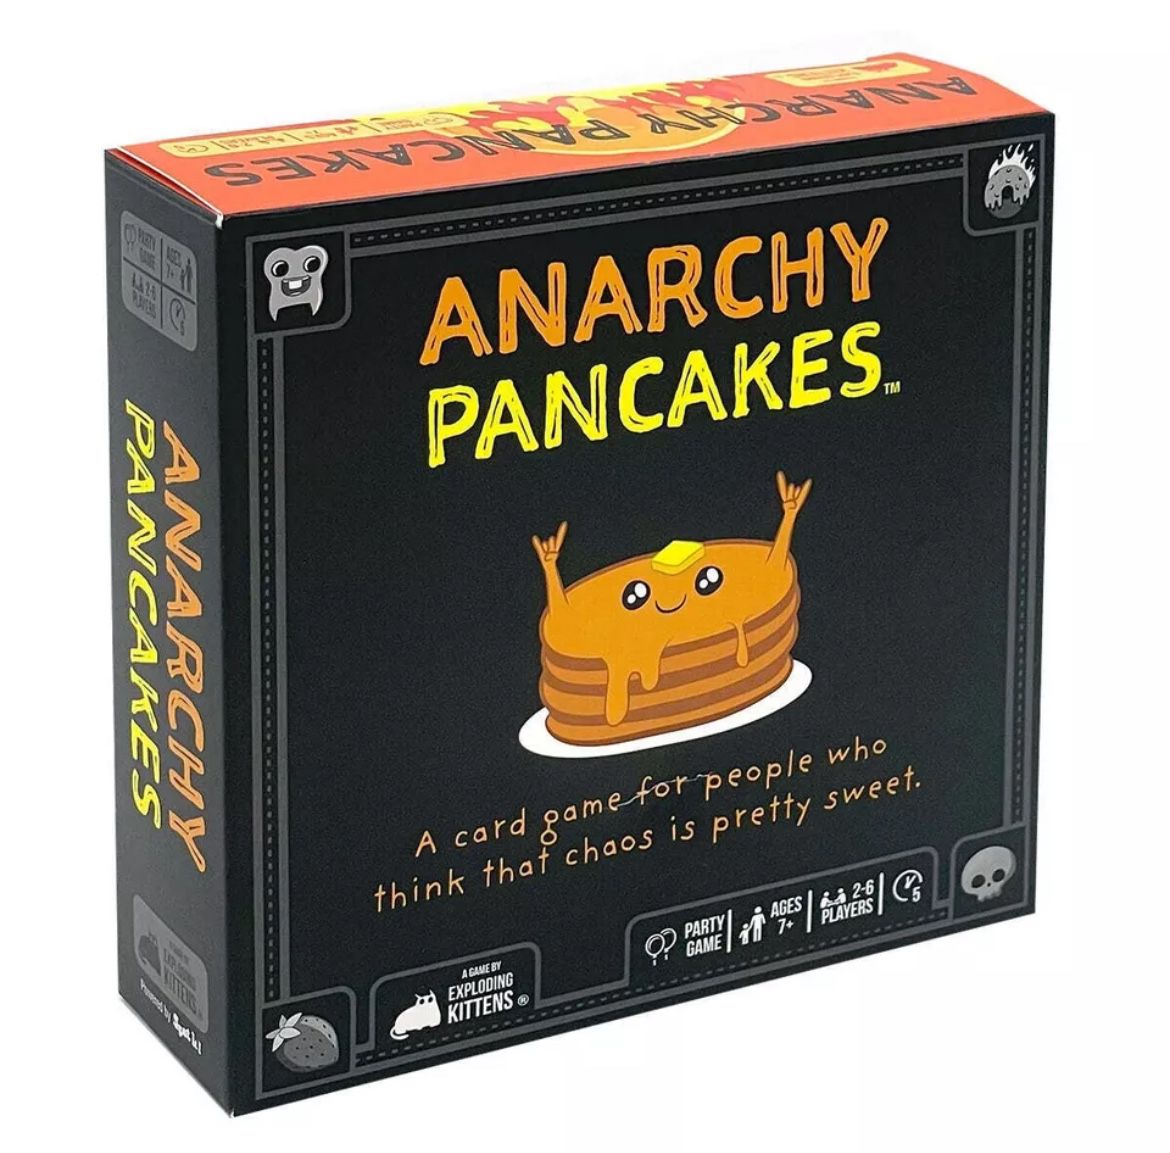 Anarchy Pancakes - By Exploding Kittens - New